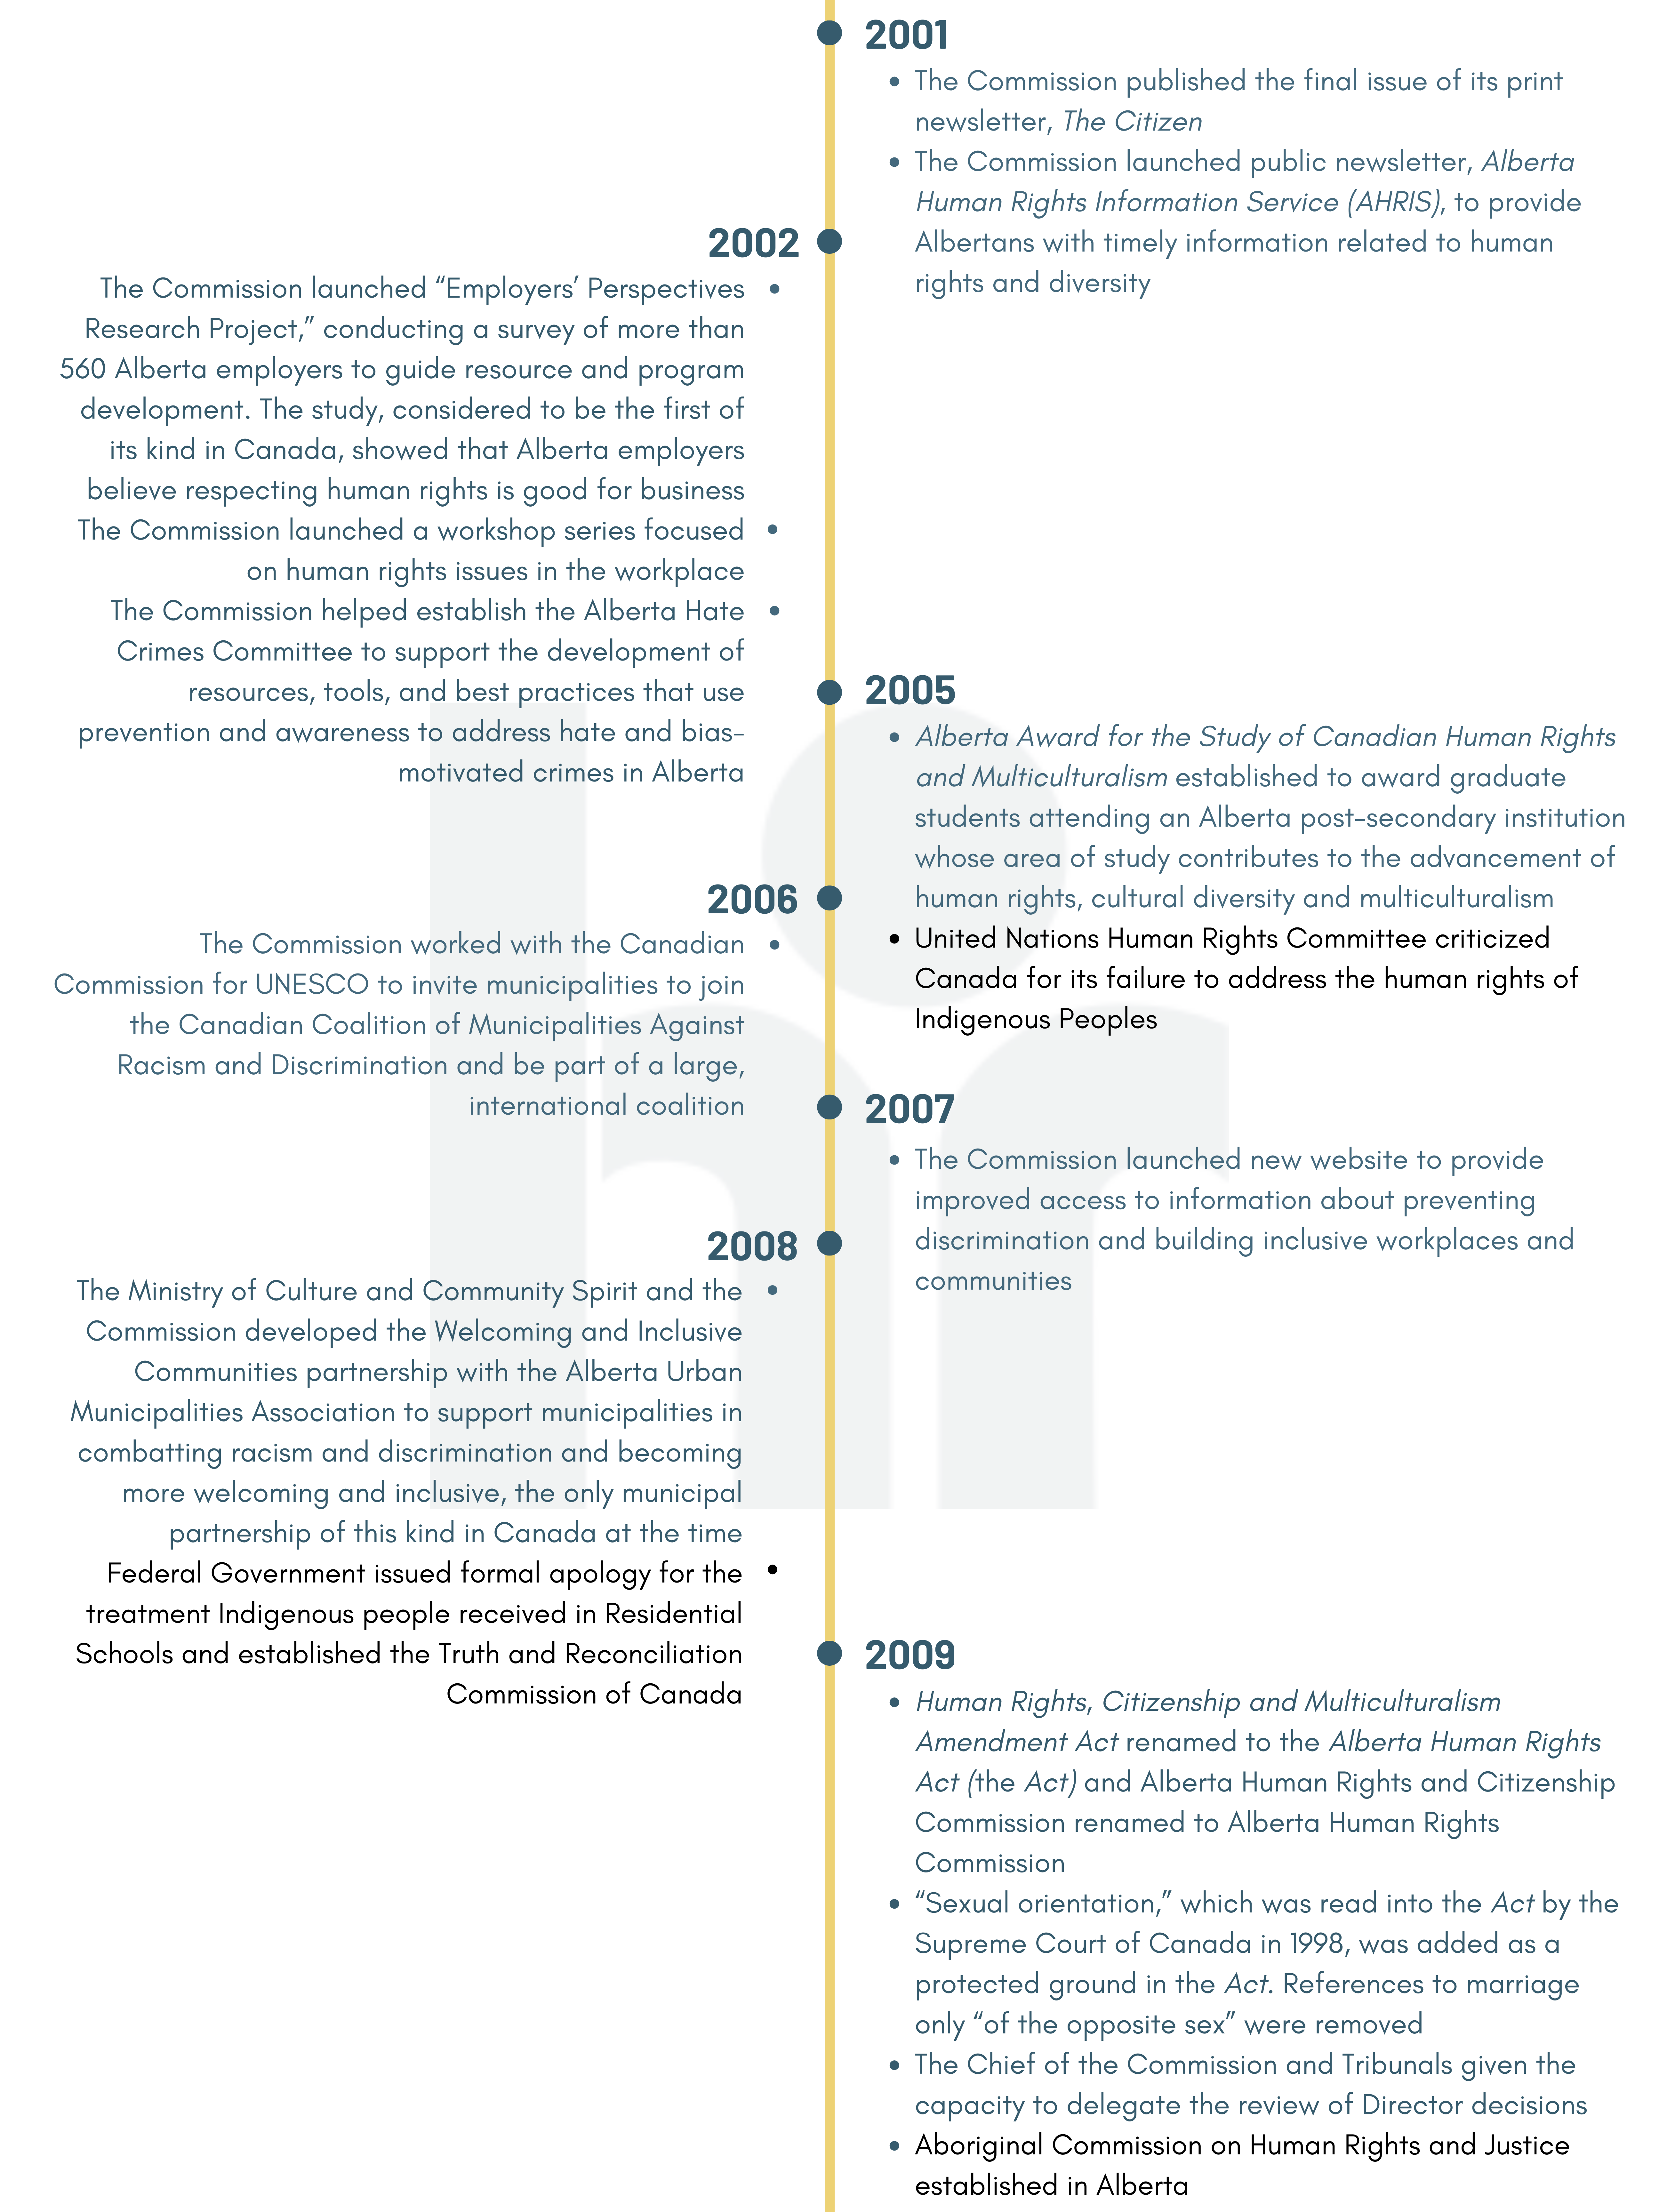 Graphic - Timeline from 2001 to 2009 describing significant events in Alberta's human rights history.